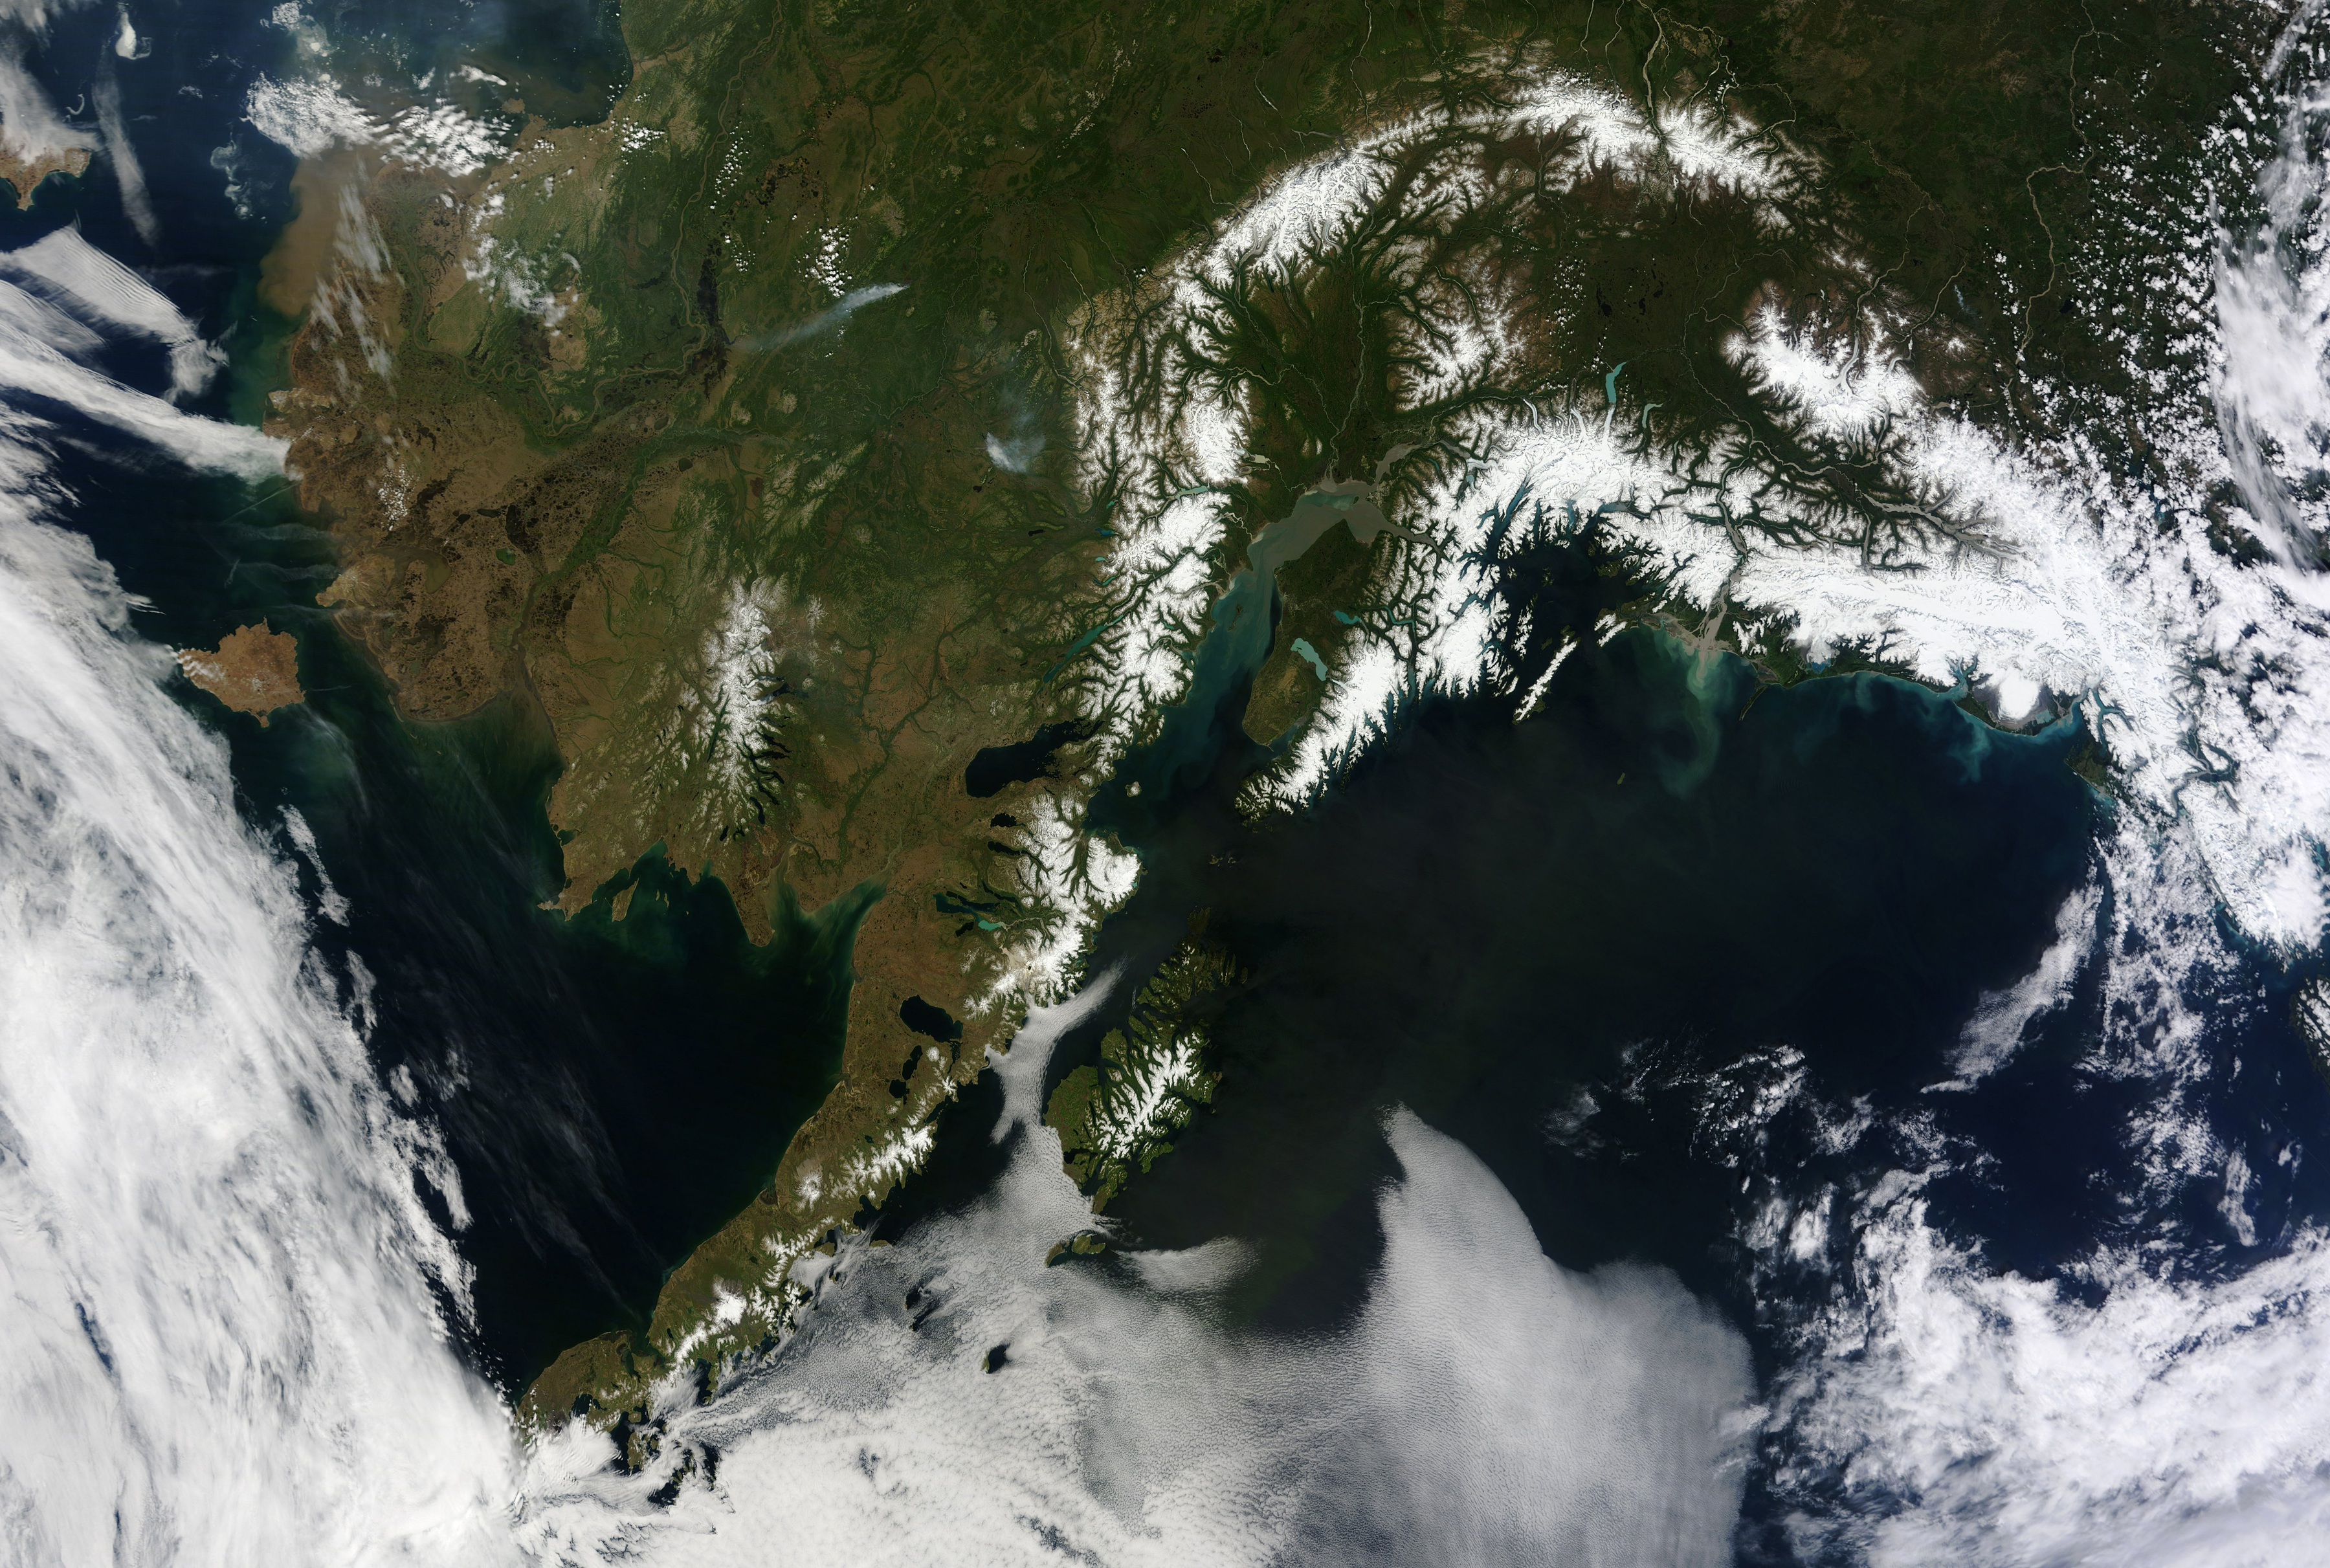 The absence of clouds exposed a striking tapestry of water, ice, land, forests, and even wildfires of Alaska. Snow-covered mountains such as the Alaska Range and Chugach Mountains were visible in southern Alaska, while the arc of mountains that make up the Brooks Range dominated the northern part of the state. The Yukon River -- the longest in Alaska and the third longest in the United States -- wound its way through the green boreal forests that inhabit the interior of the state. Plumes of sediment and glacial dust poured into the Gulf of Alaska from the Copper River. And Iliamna Lake, the largest in Alaska, was ice free. (Jeff Schmaltz/NASA/MCT)